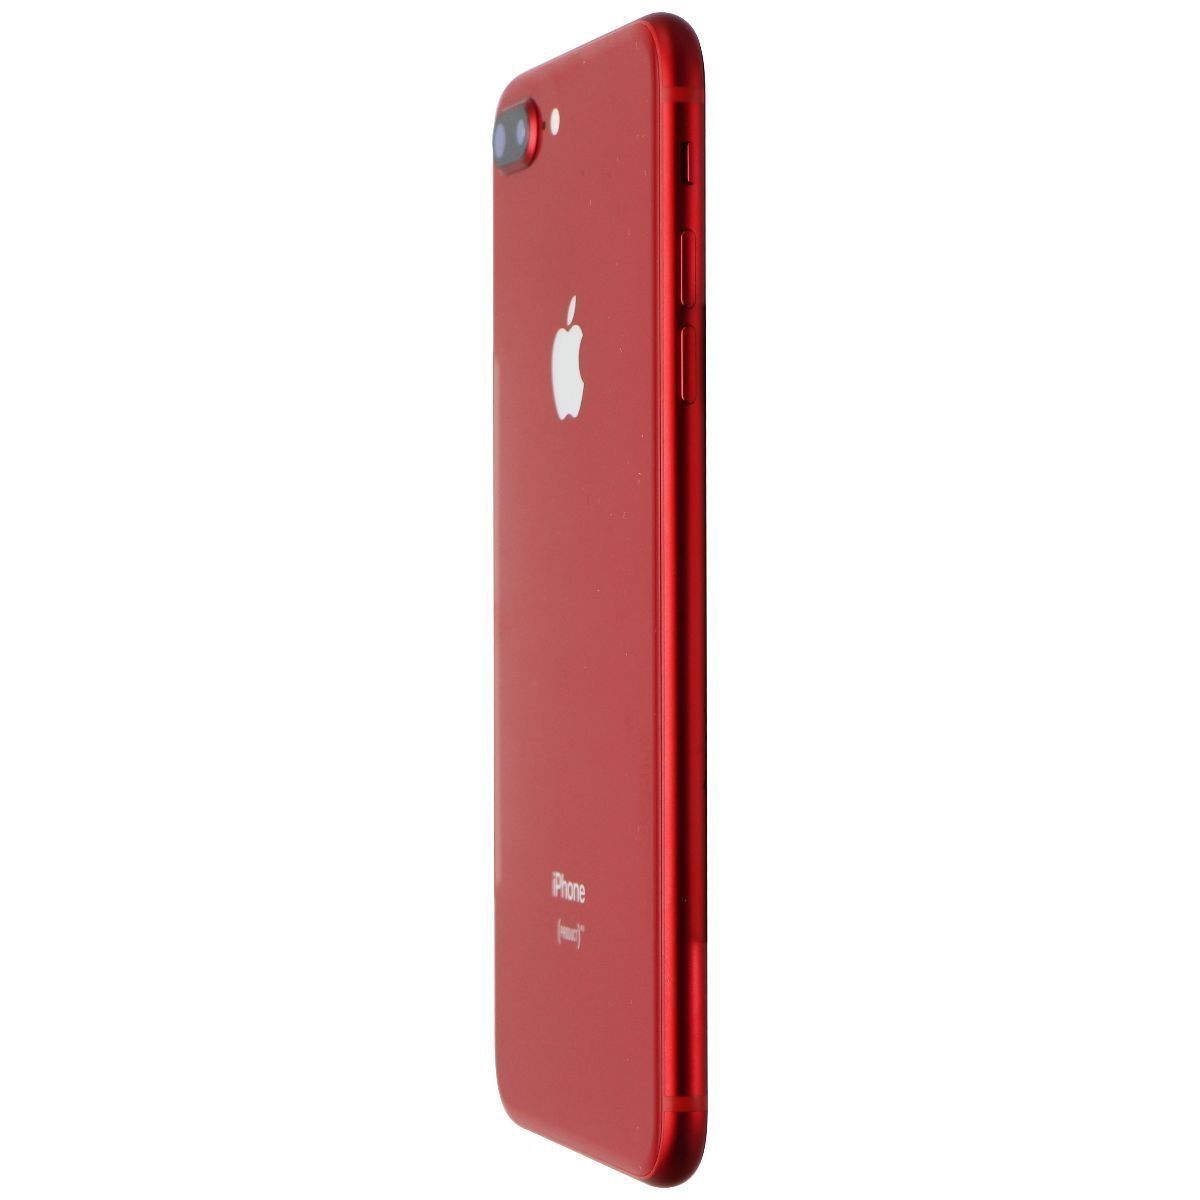 Apple iPhone 8 Plus (5.5-inch) Smartphone (A1897) Unlocked - 64GB / Red